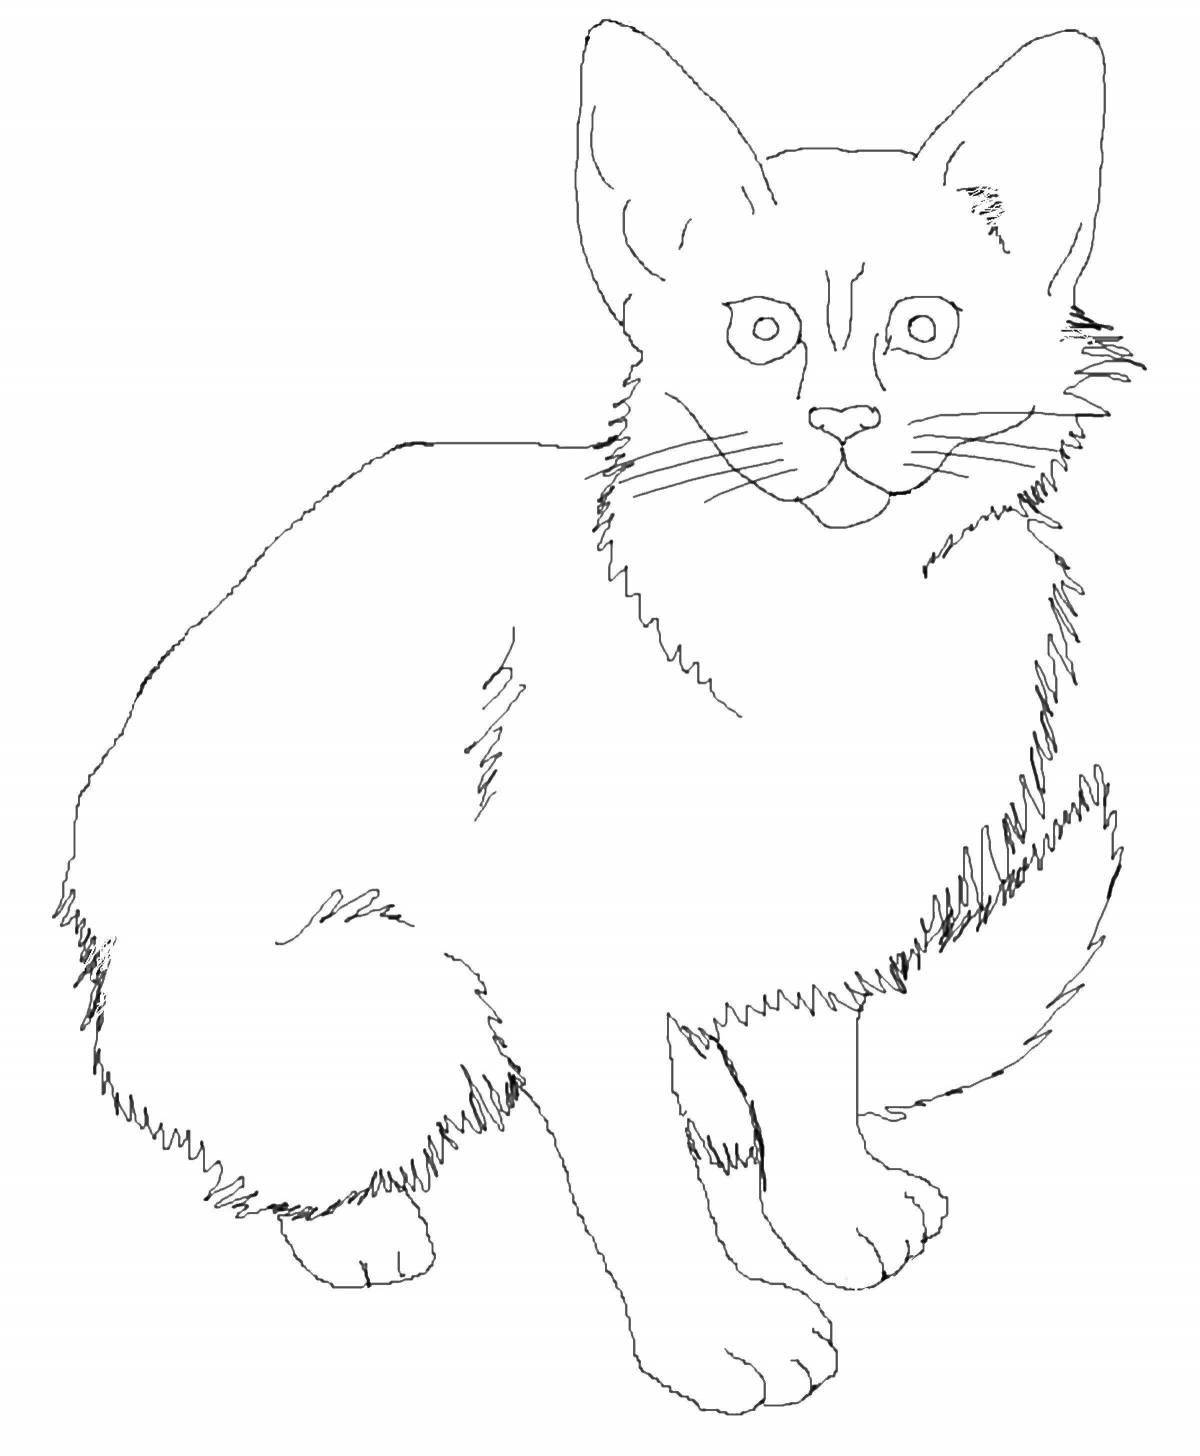 Caution, the coloring of the cat is realistic